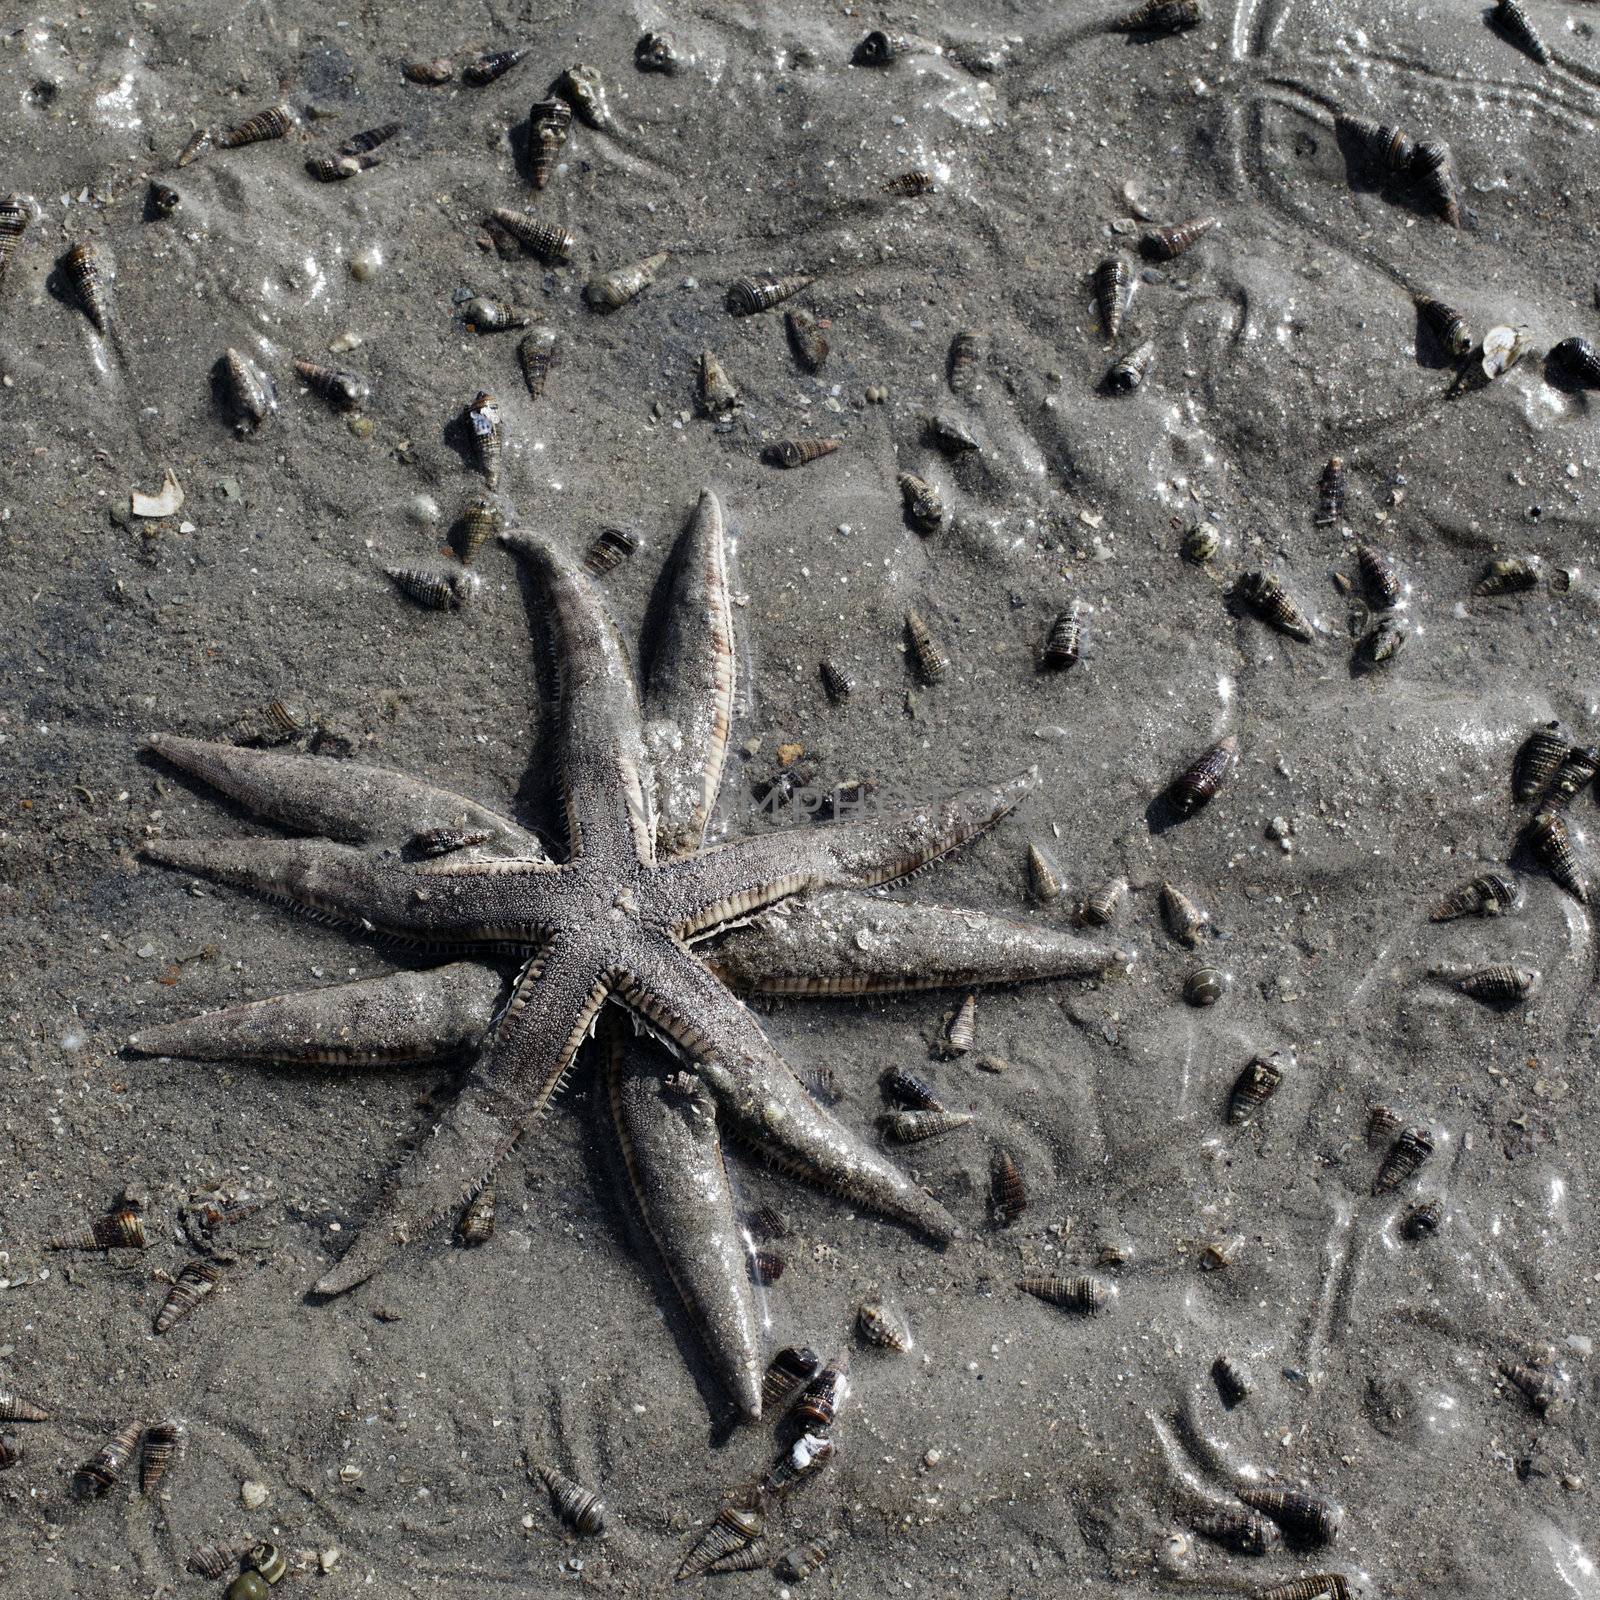 Two Starfishes by petr_malyshev